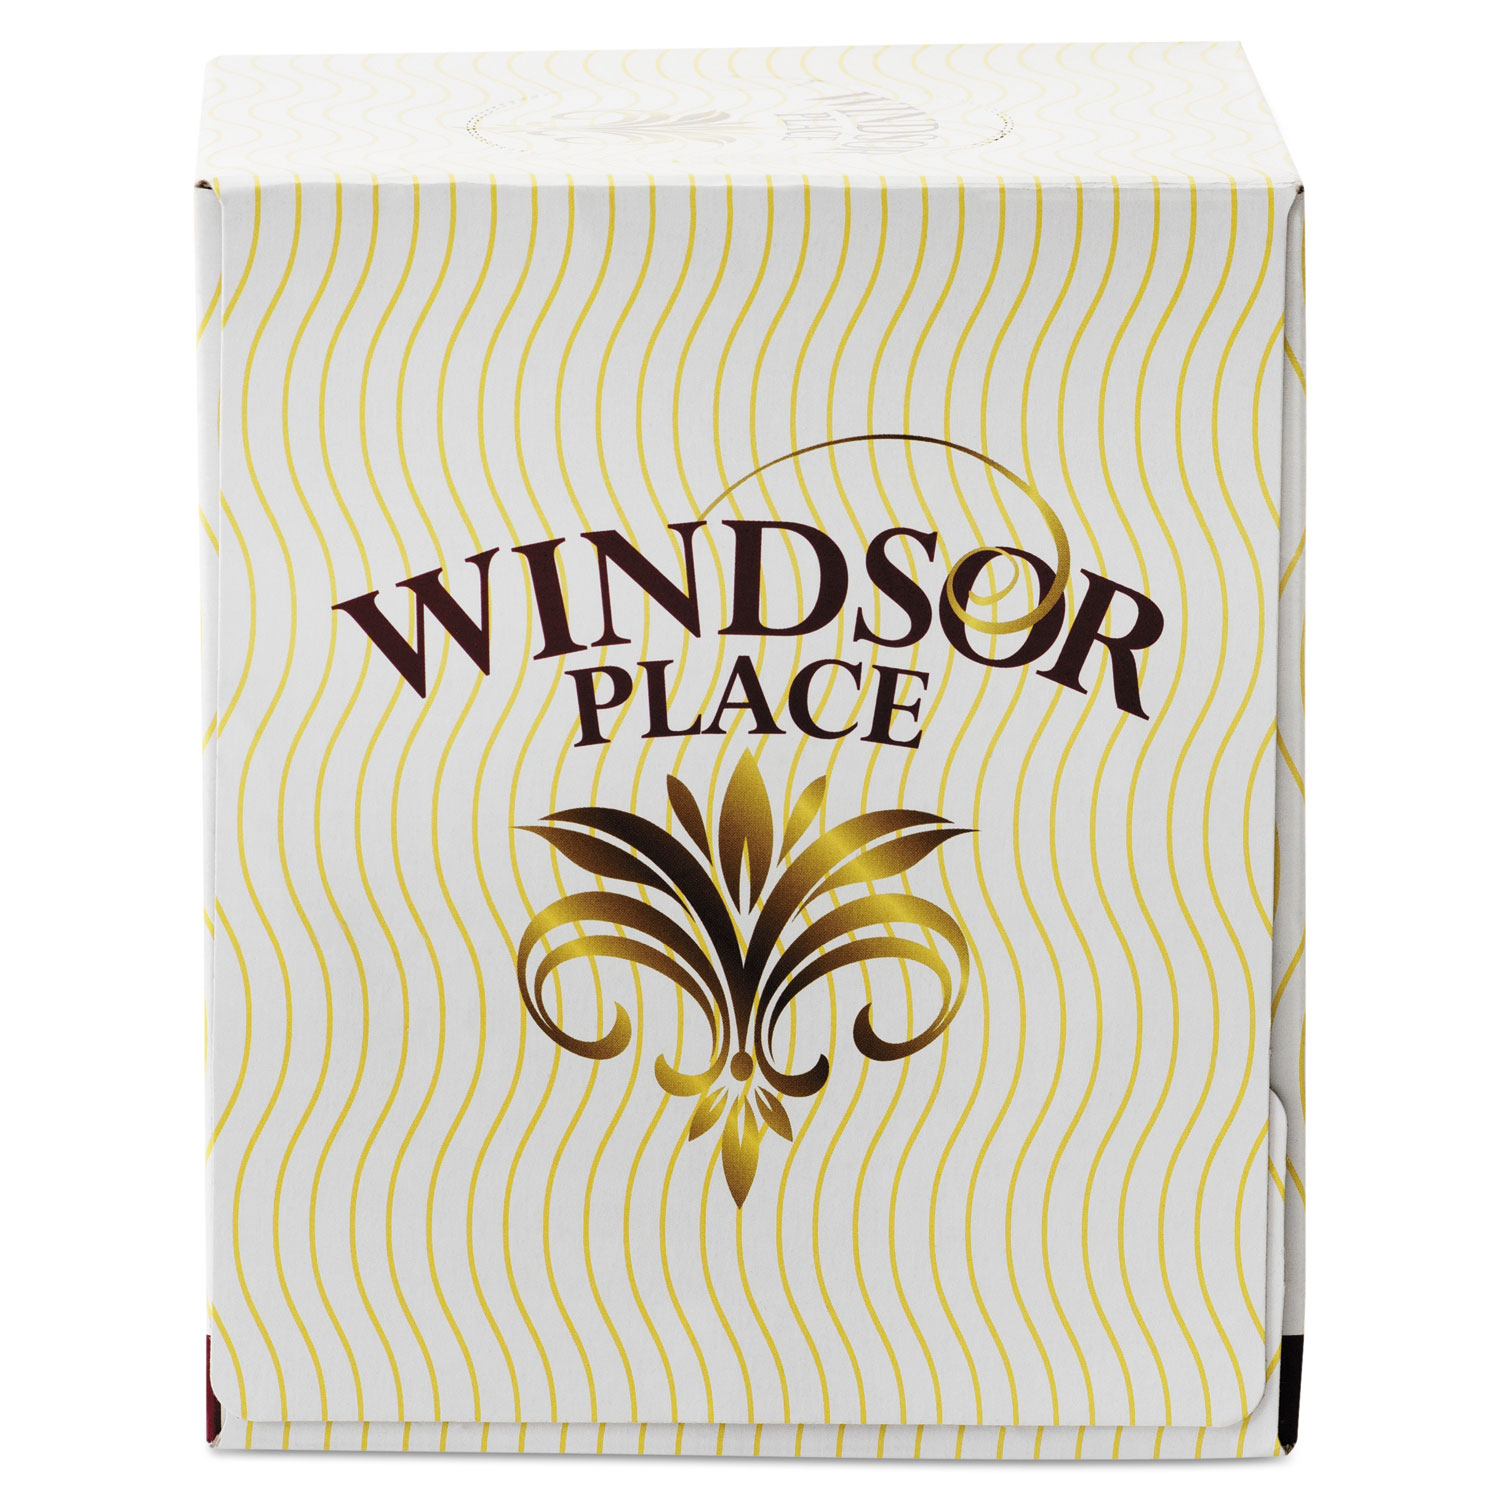  Resolute Tissue APM 336 Windsor Place Cube Facial Tissue, 2-Ply, White, 85 Sheets/Box, 30 Boxes/Carton (APM336) 